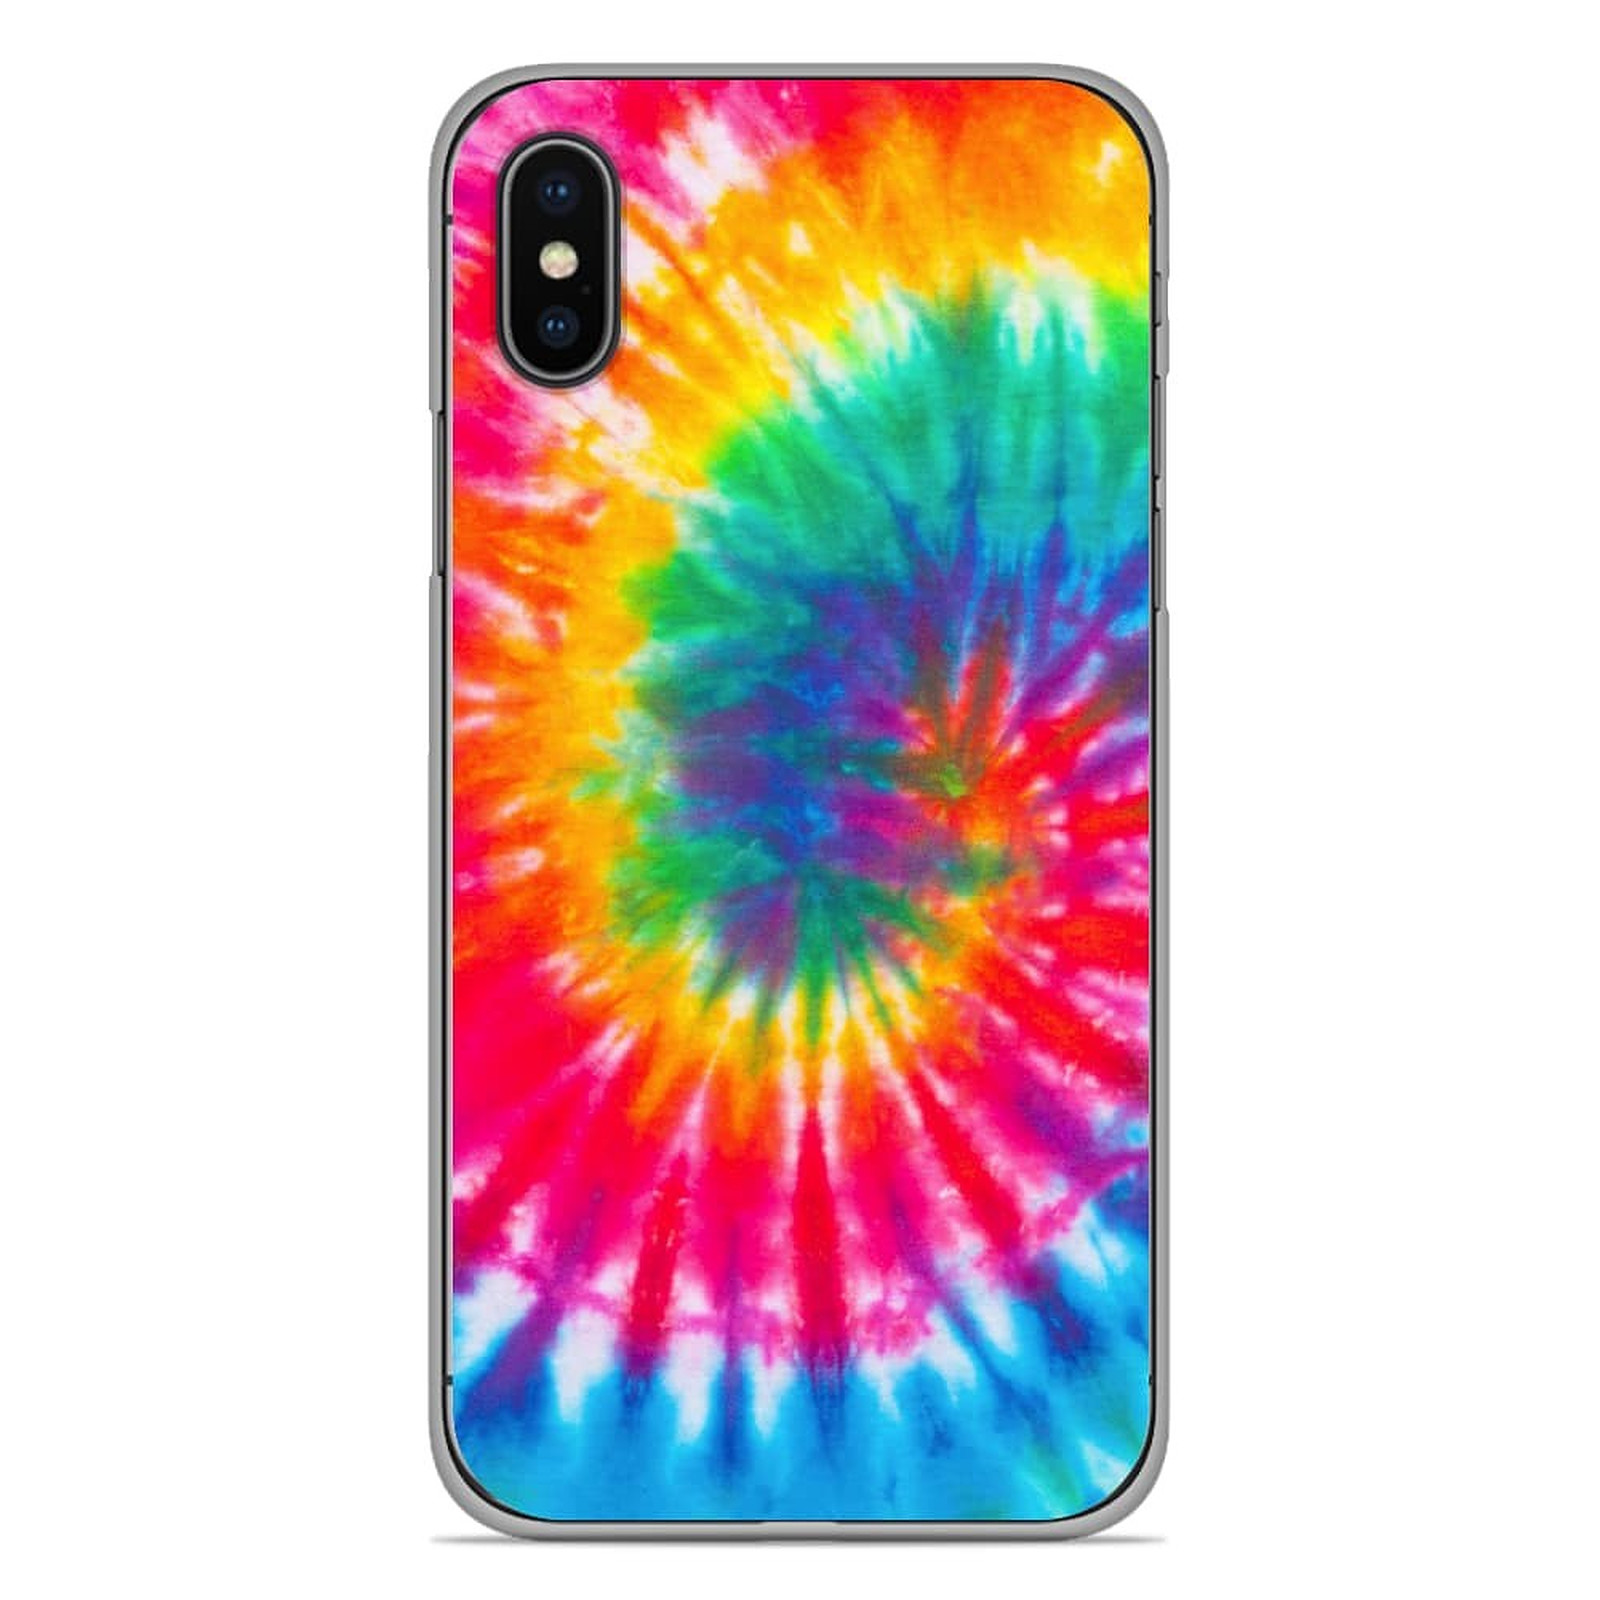 1001 Coques Coque silicone gel Apple iPhone X / XS motif Tie Dye Spirale - Coque telephone 1001Coques